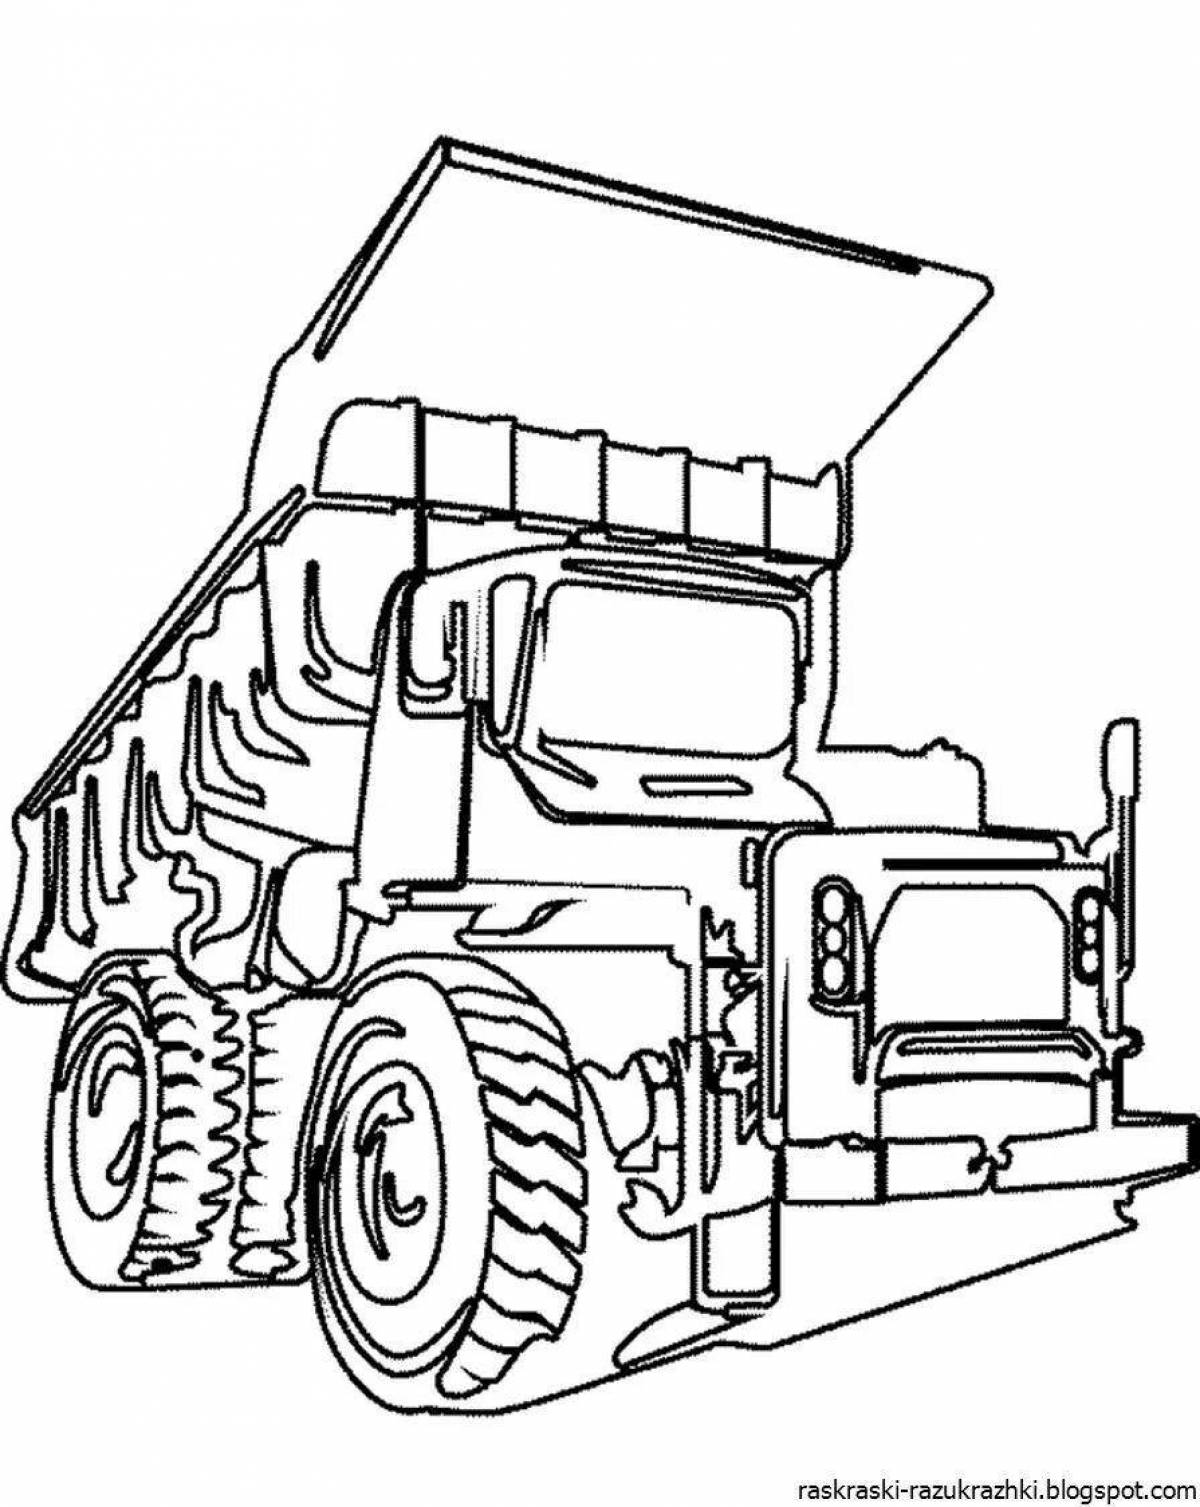 Fun tractor coloring page